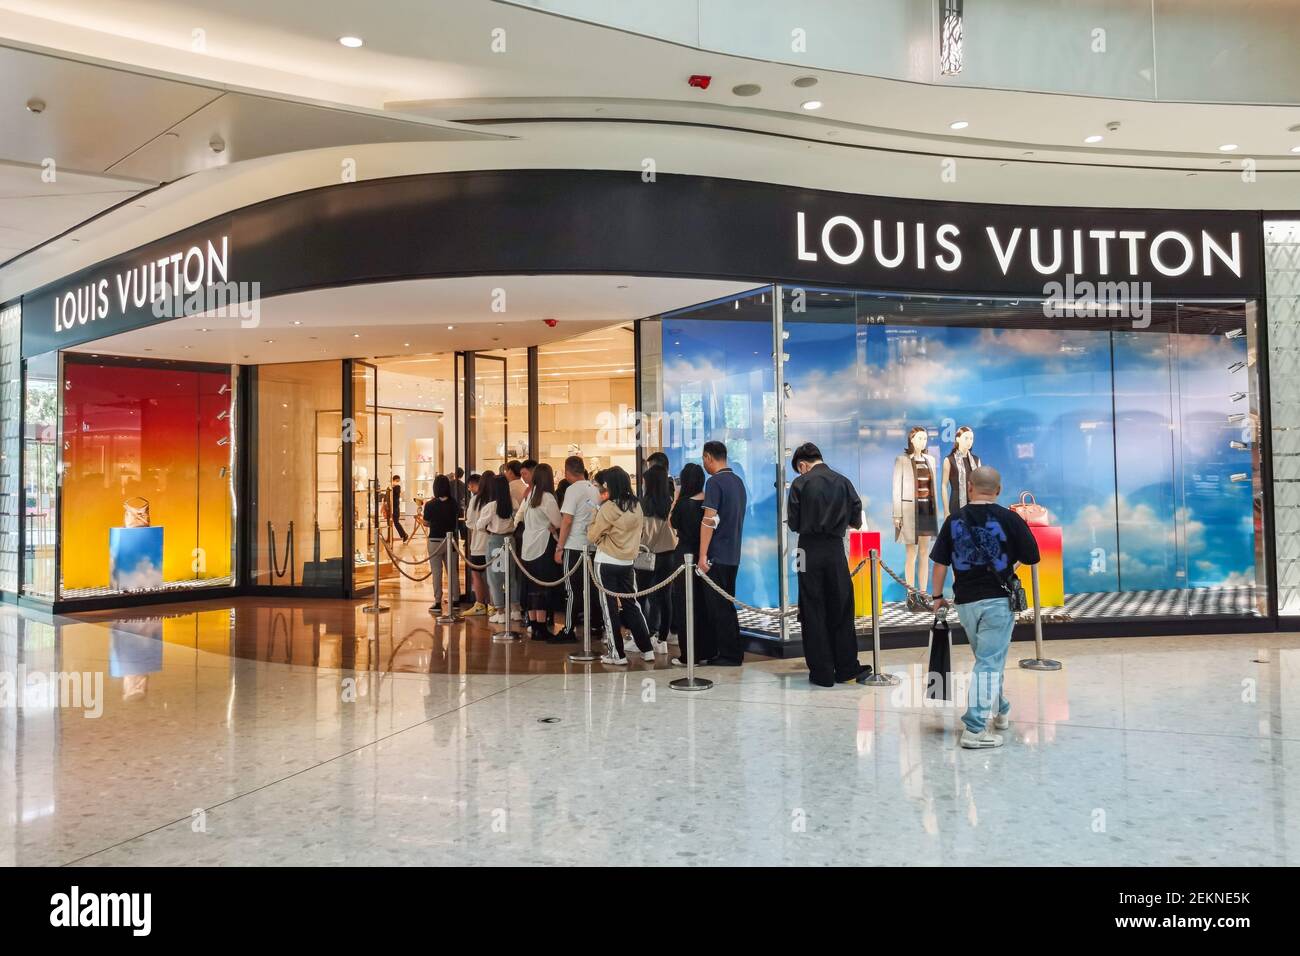 People line up as they wait to get in the Louis Vuitton shop on